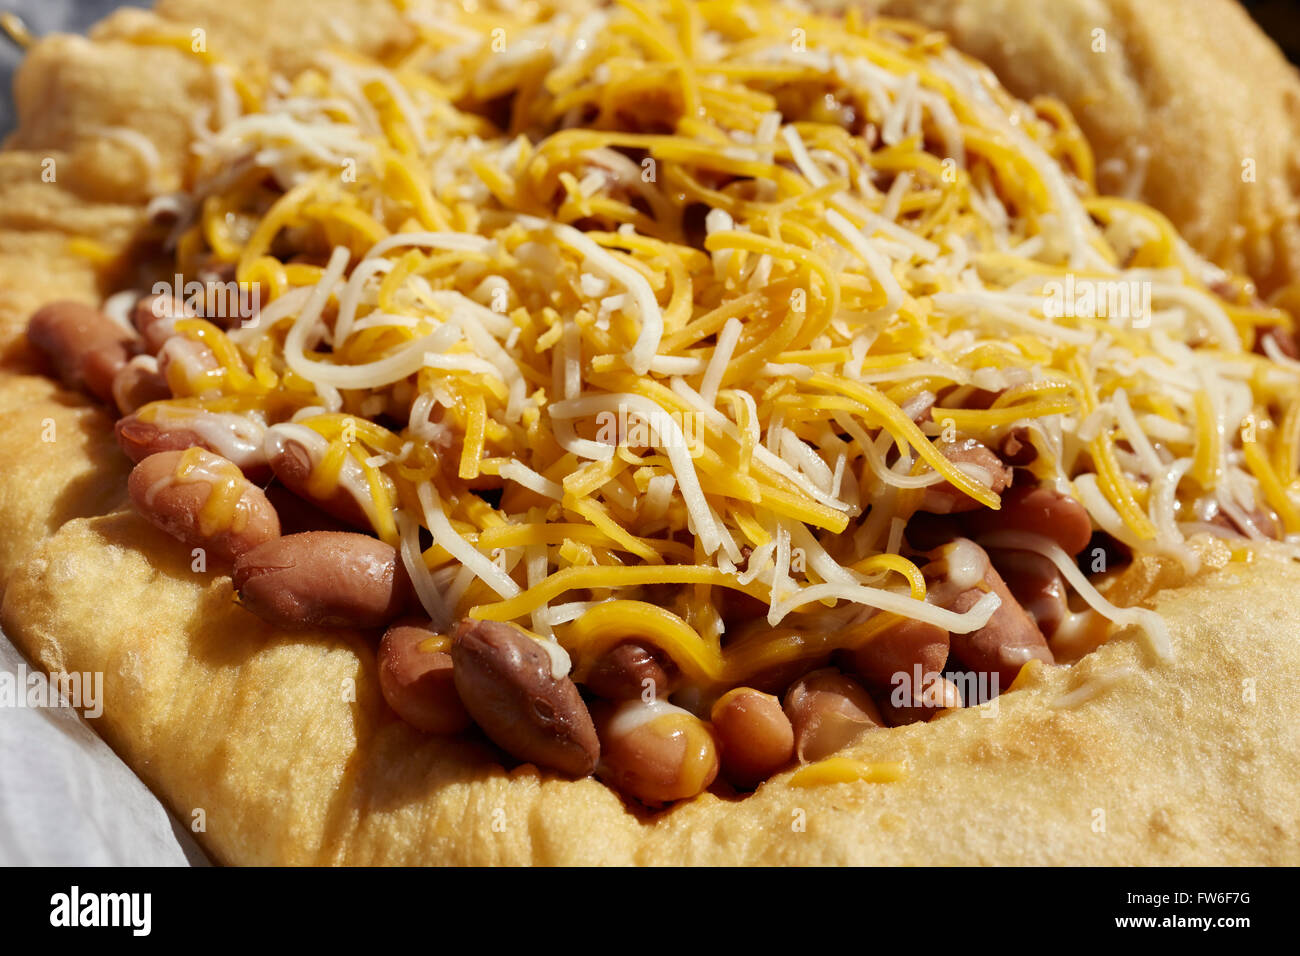 Chile Bean Frybread With Shredded Cheese A Typical Dish